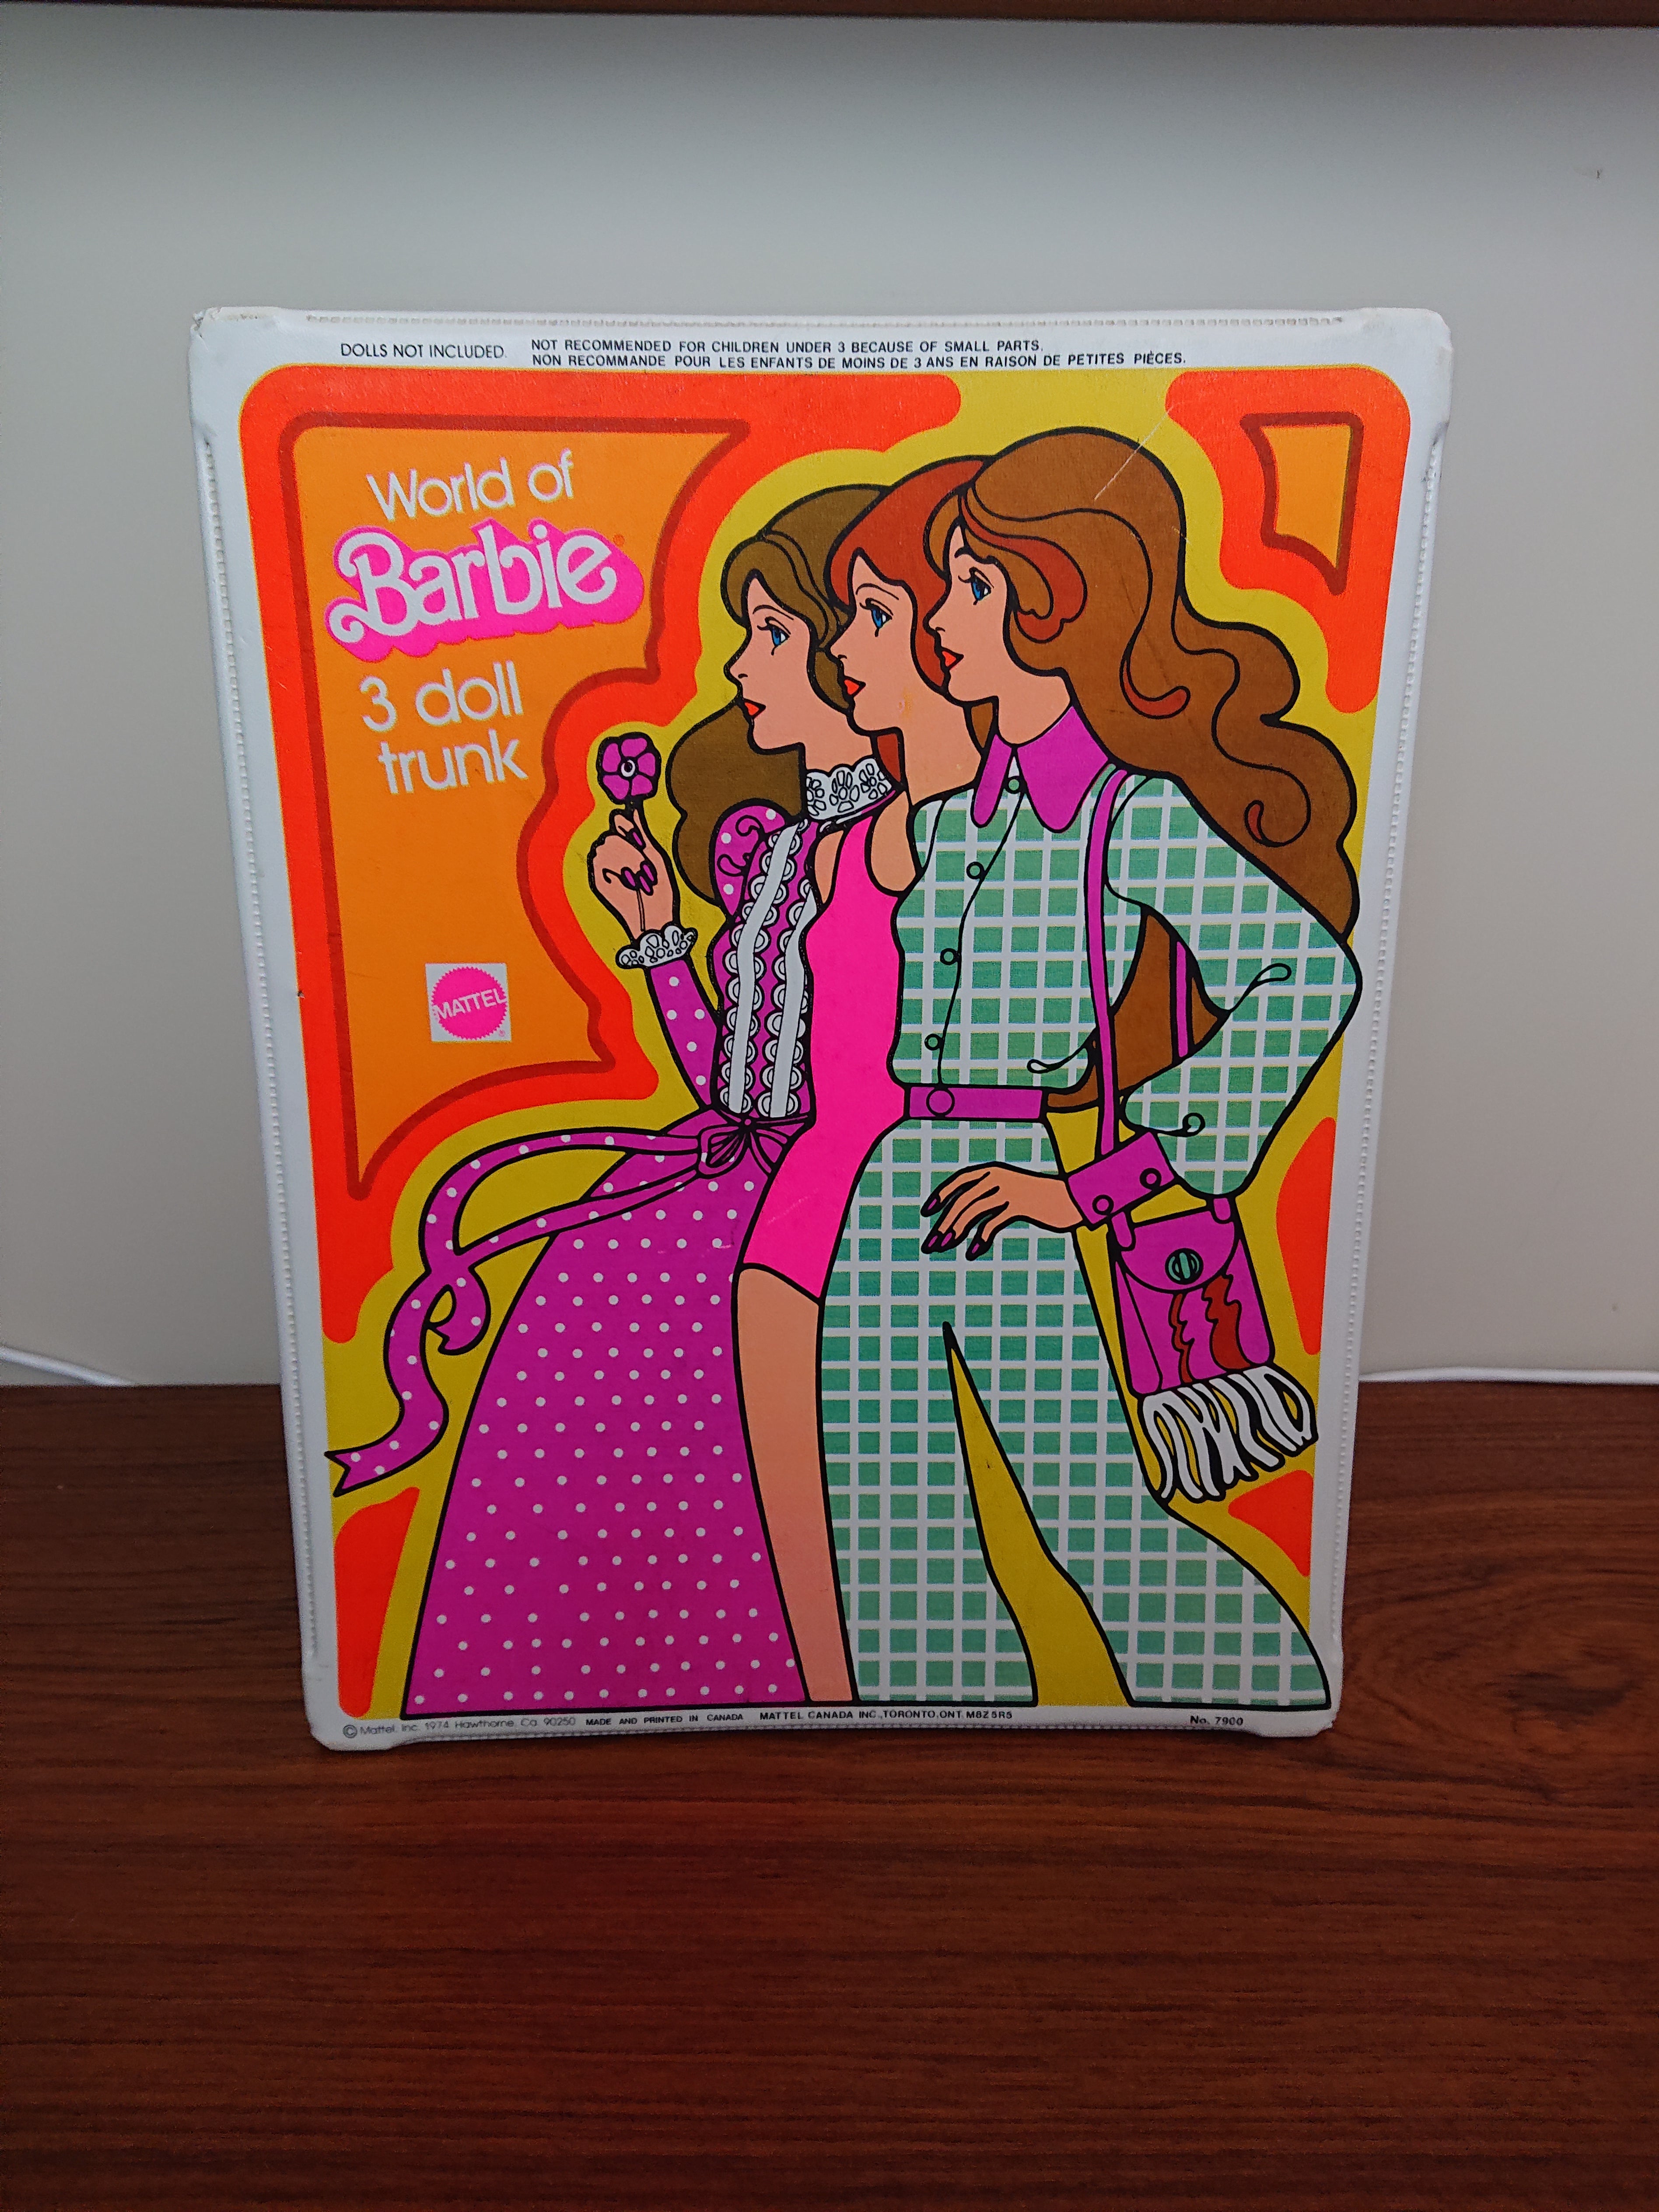 1974 World of Barbie 3 Doll Double Trunk